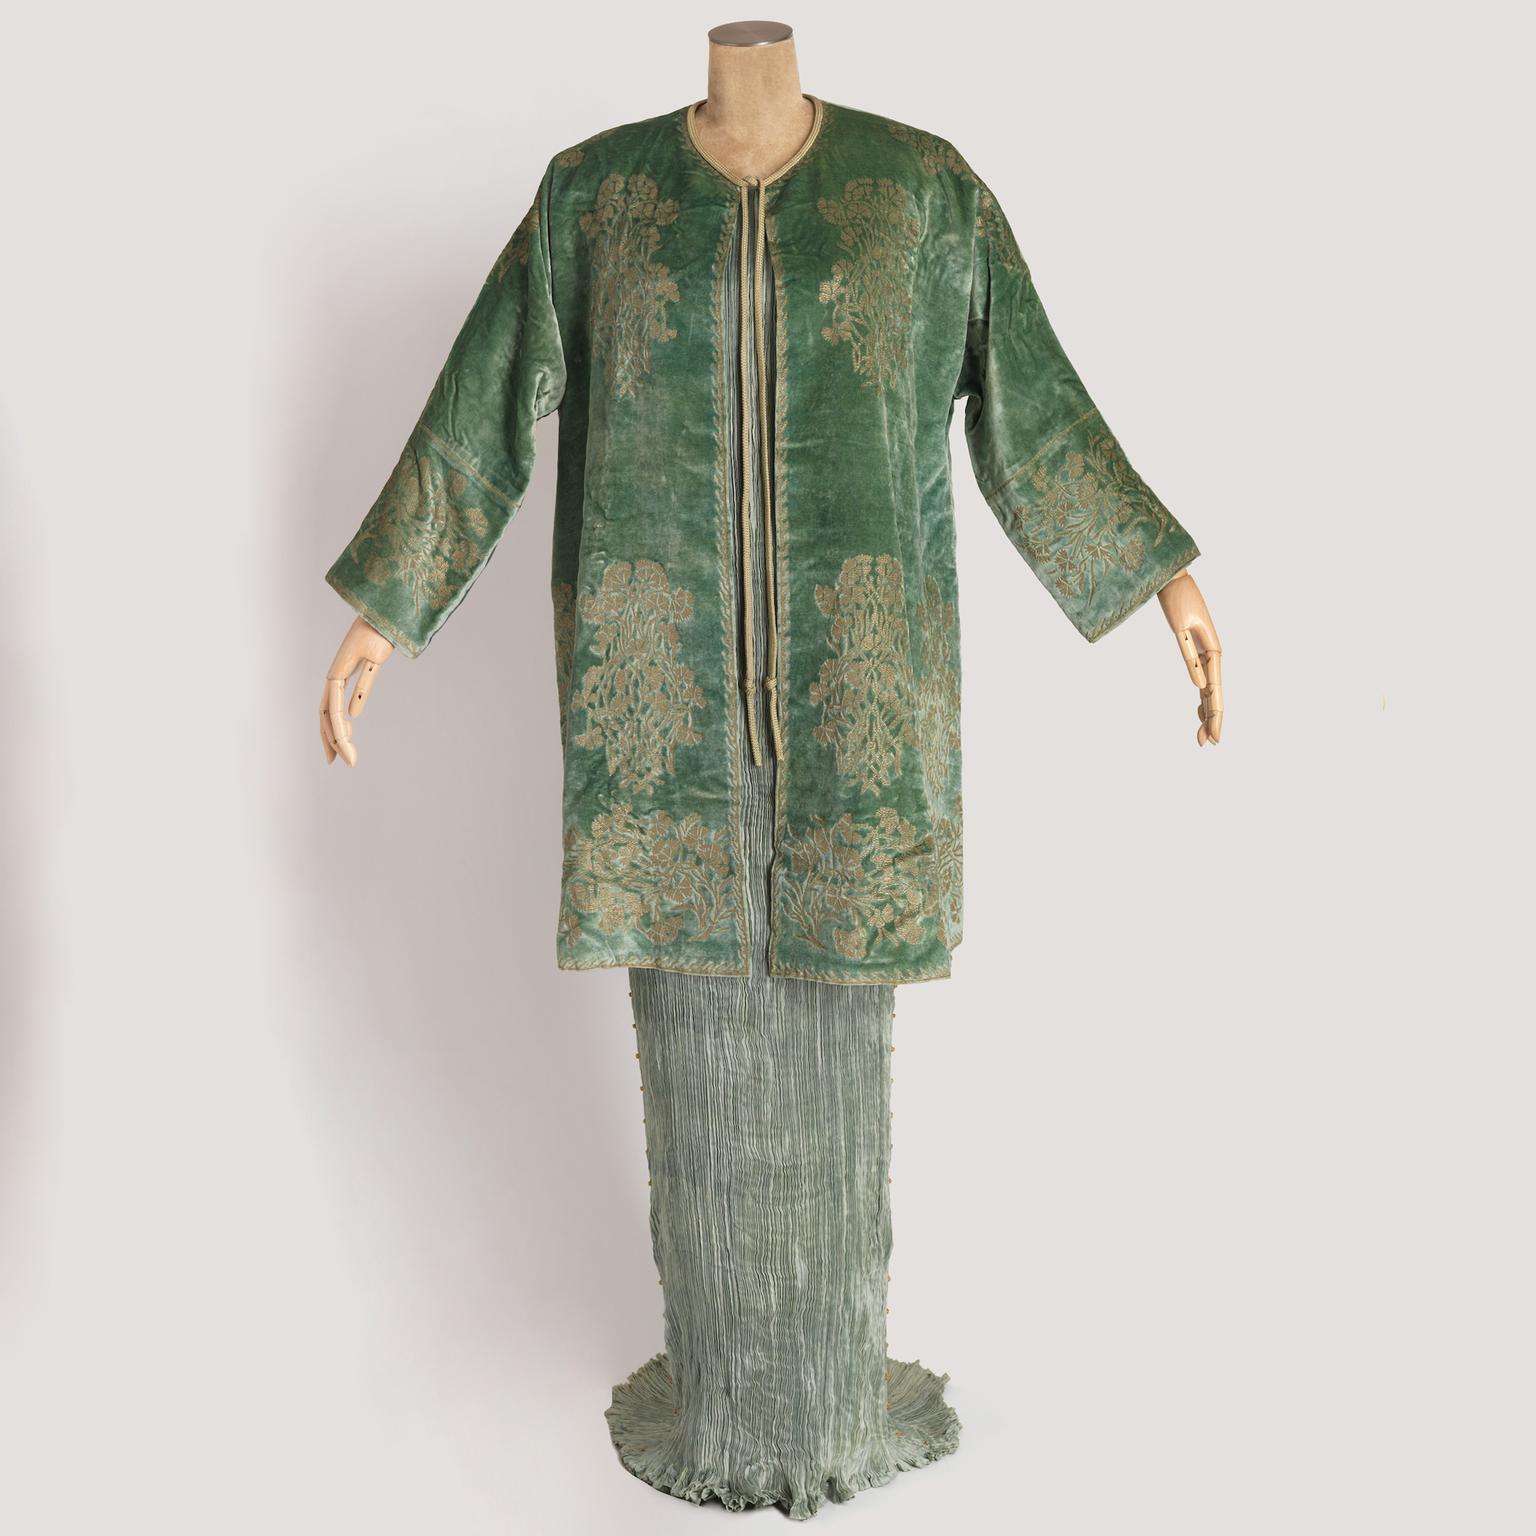 Mariano Fortuny Delphos pleated silk dress and velvet jacket from 1939